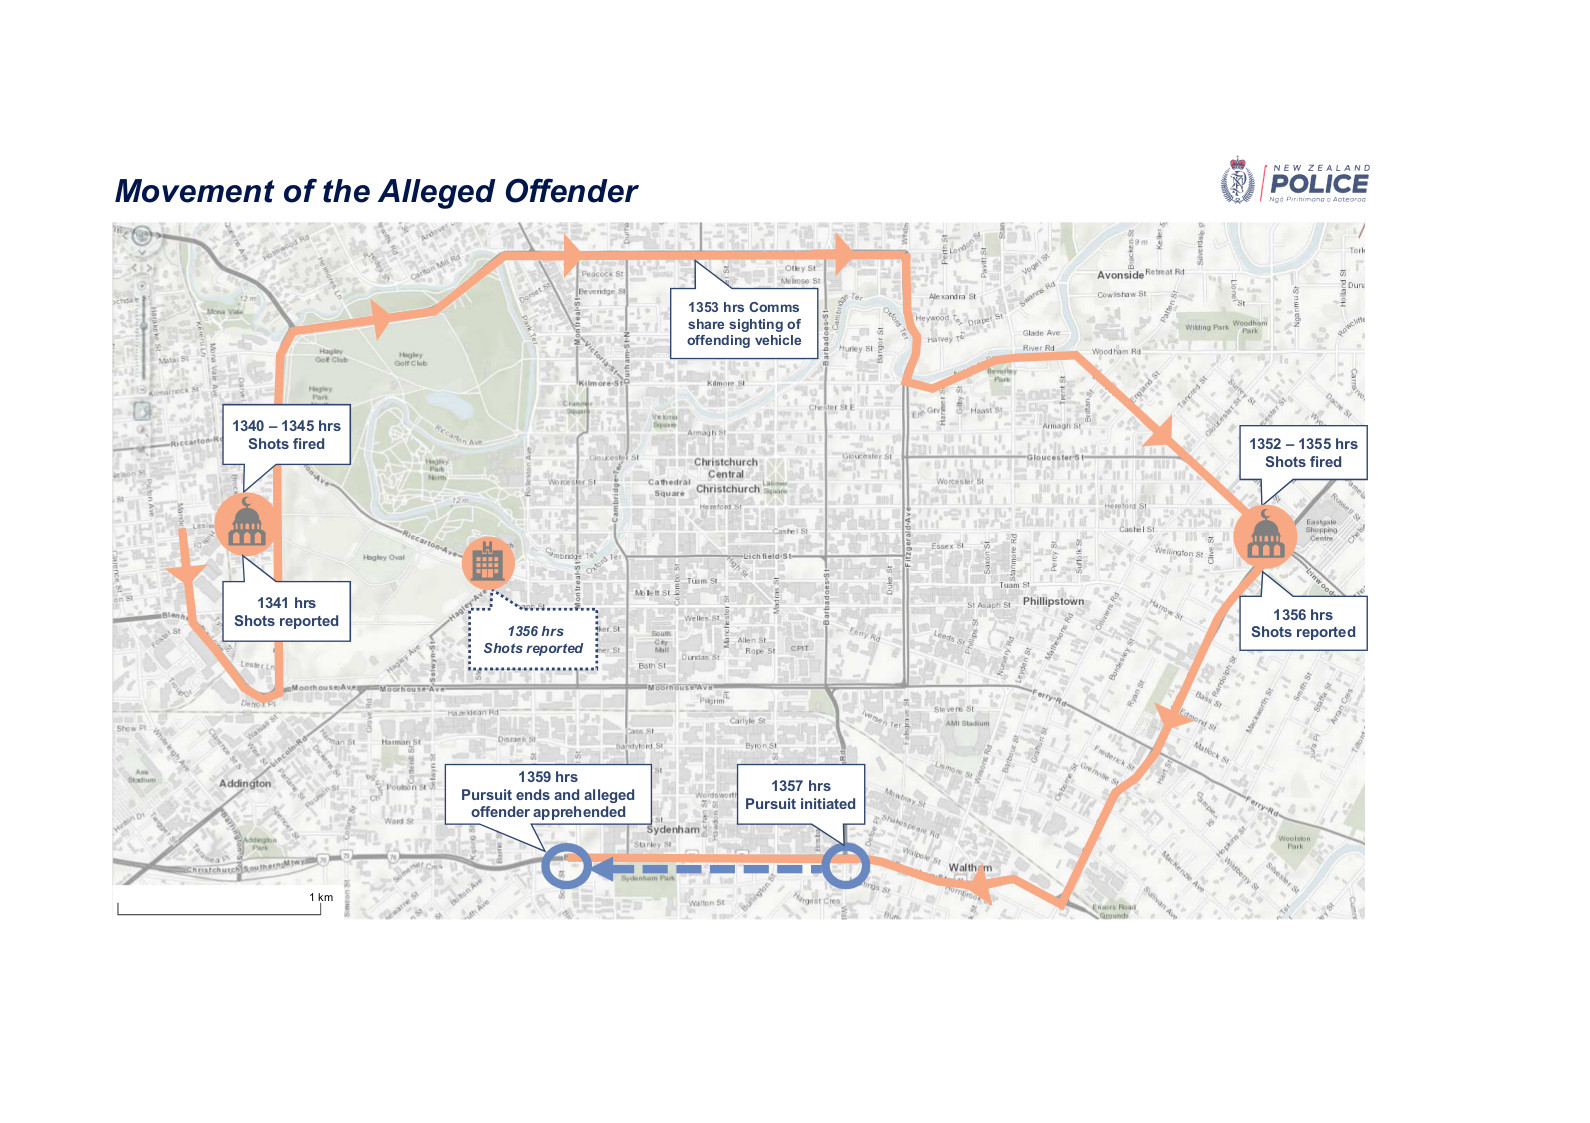 a police map showing events and times of the Christchurch mosque shootings and response